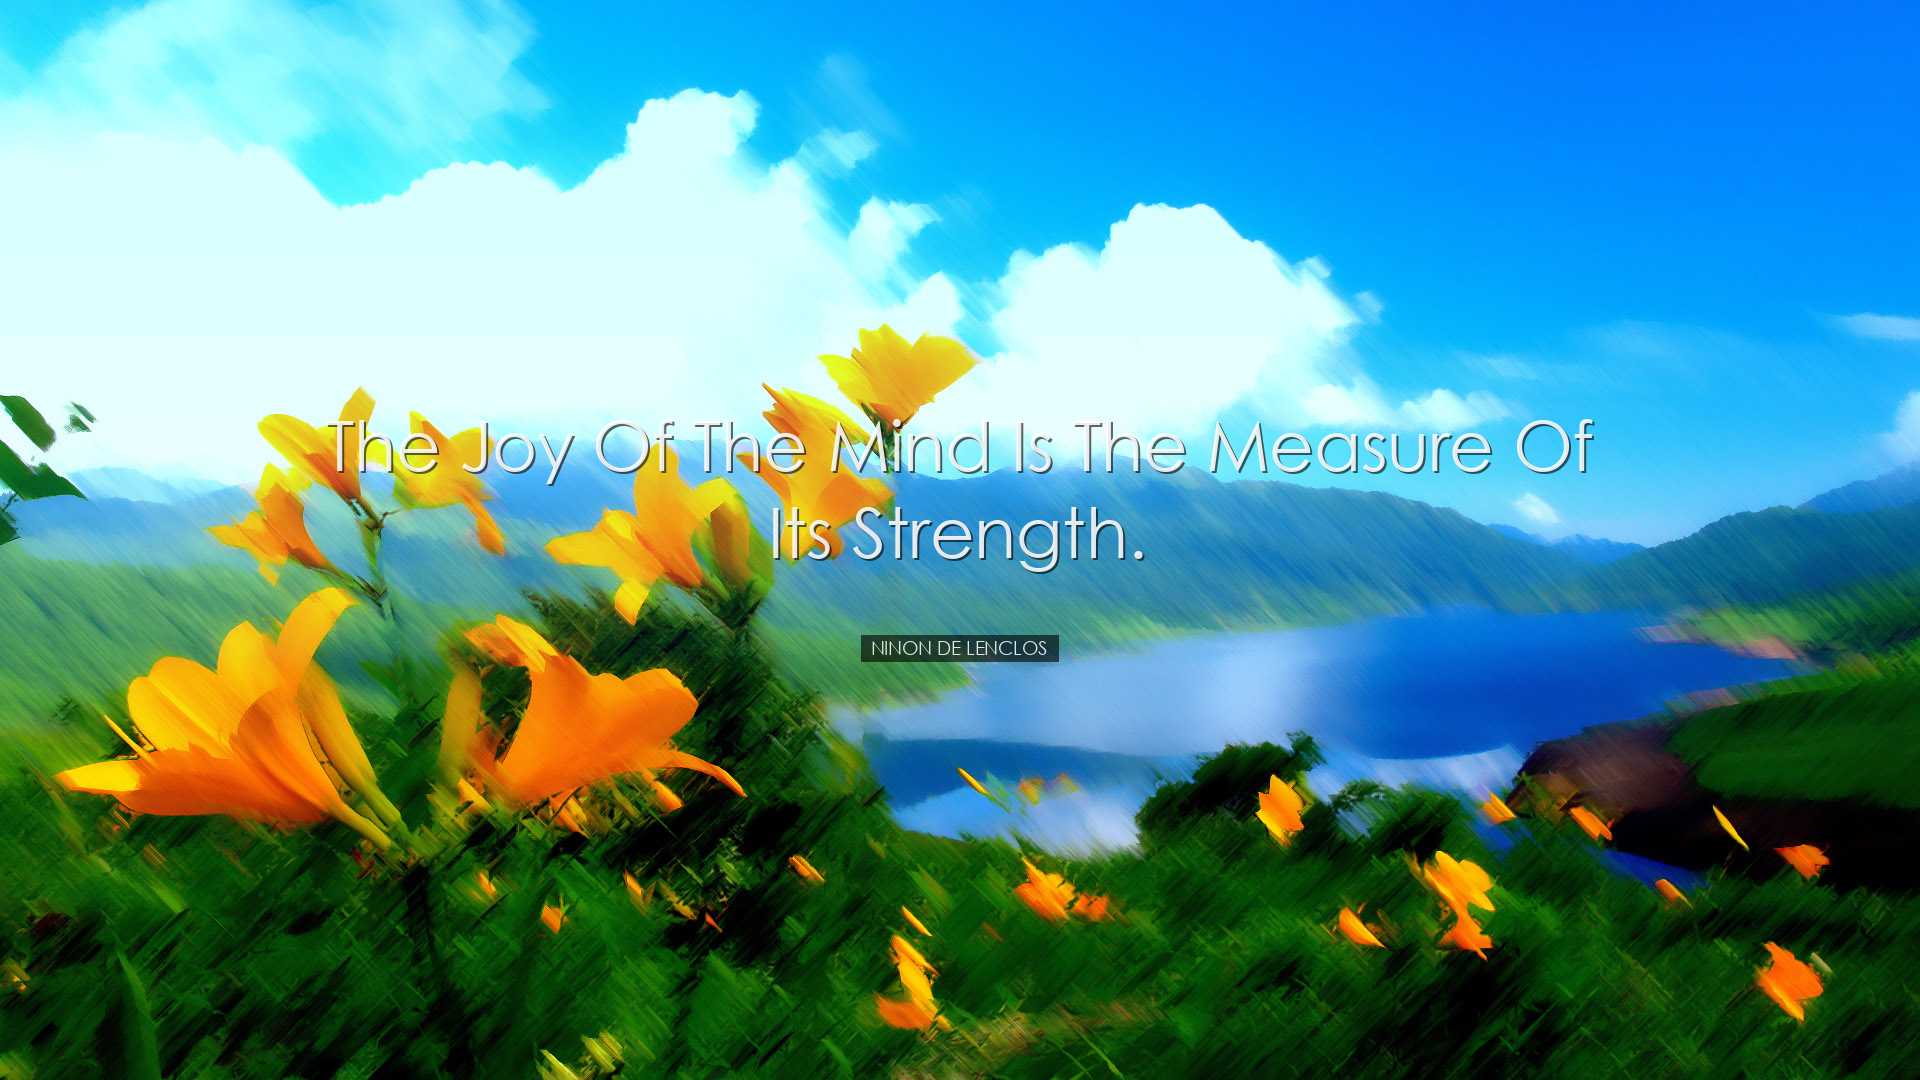 The joy of the mind is the measure of its strength. - Ninon de LEn